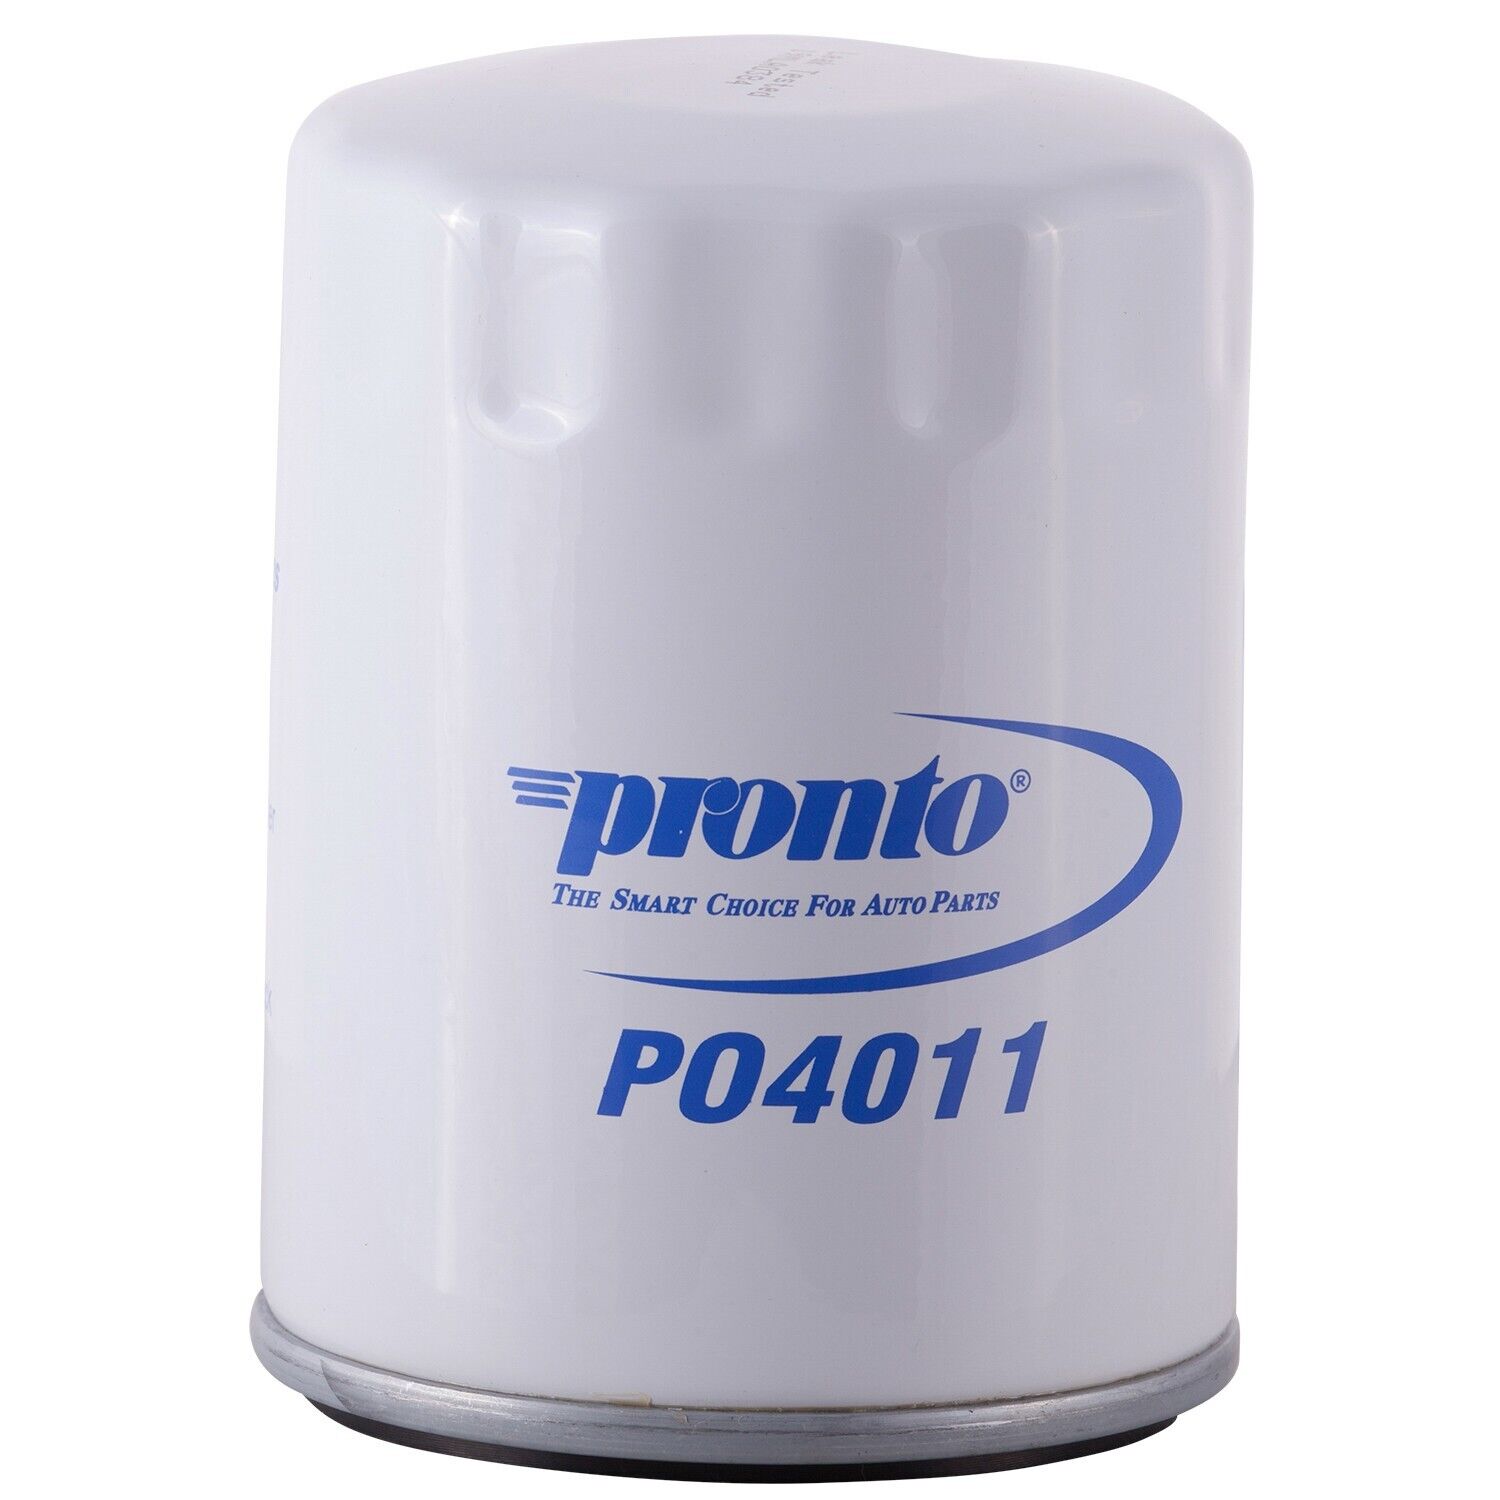 Engine Oil Filter for Vue, Blazer, P30, Jimmy, S10, Sonoma, Rodeo+More PO4011